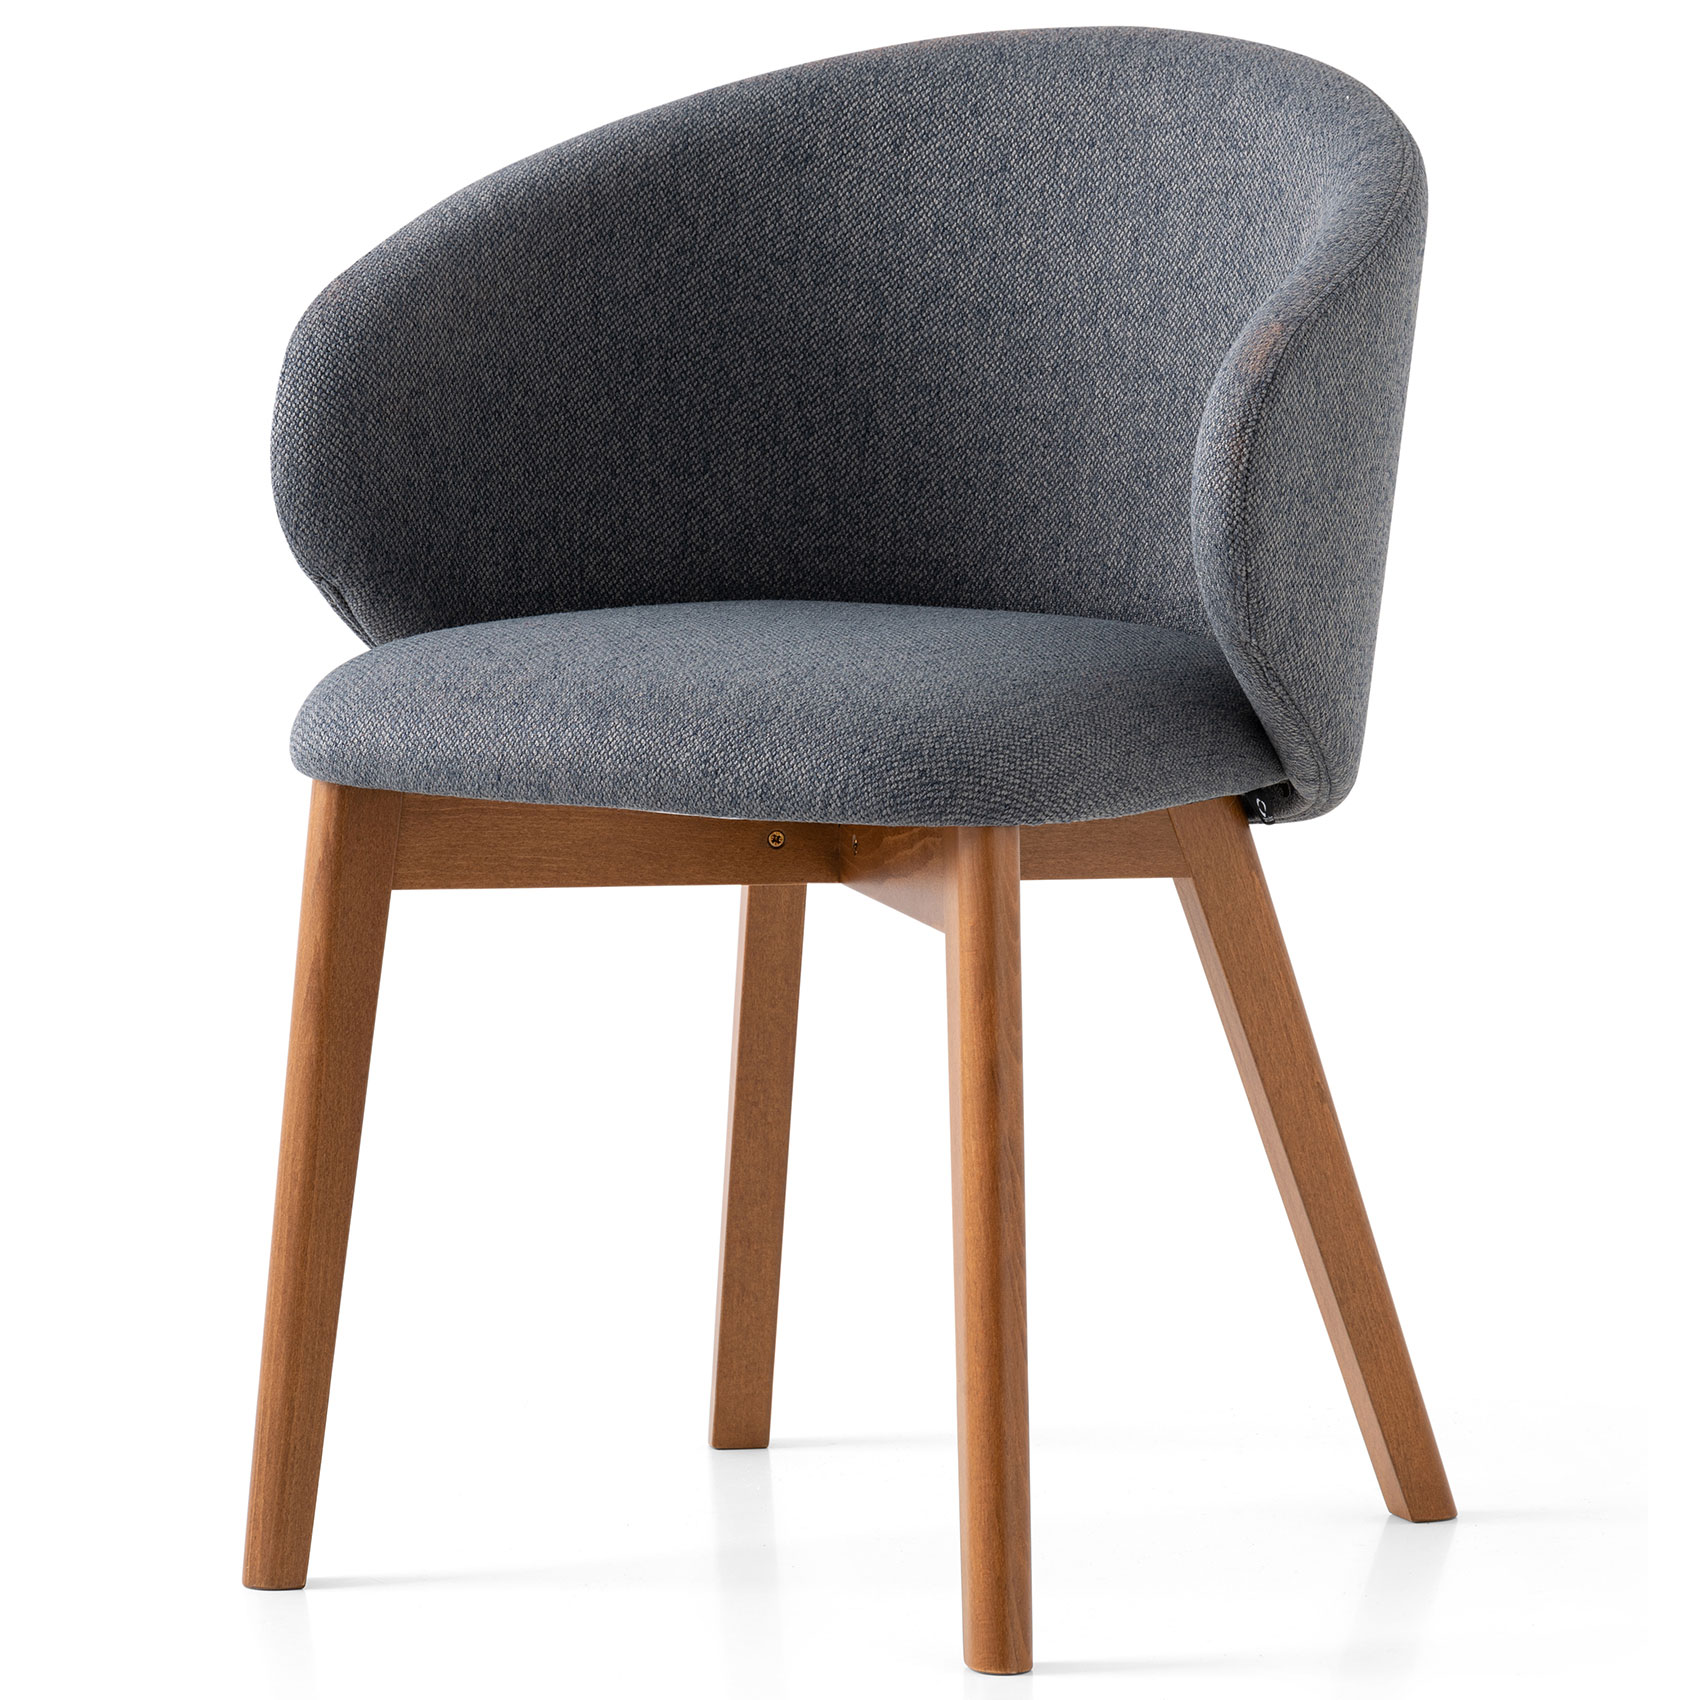 Tuka Wooden Base Armchair by Connubia | CB2117000201SLB00000000 | CON1086521